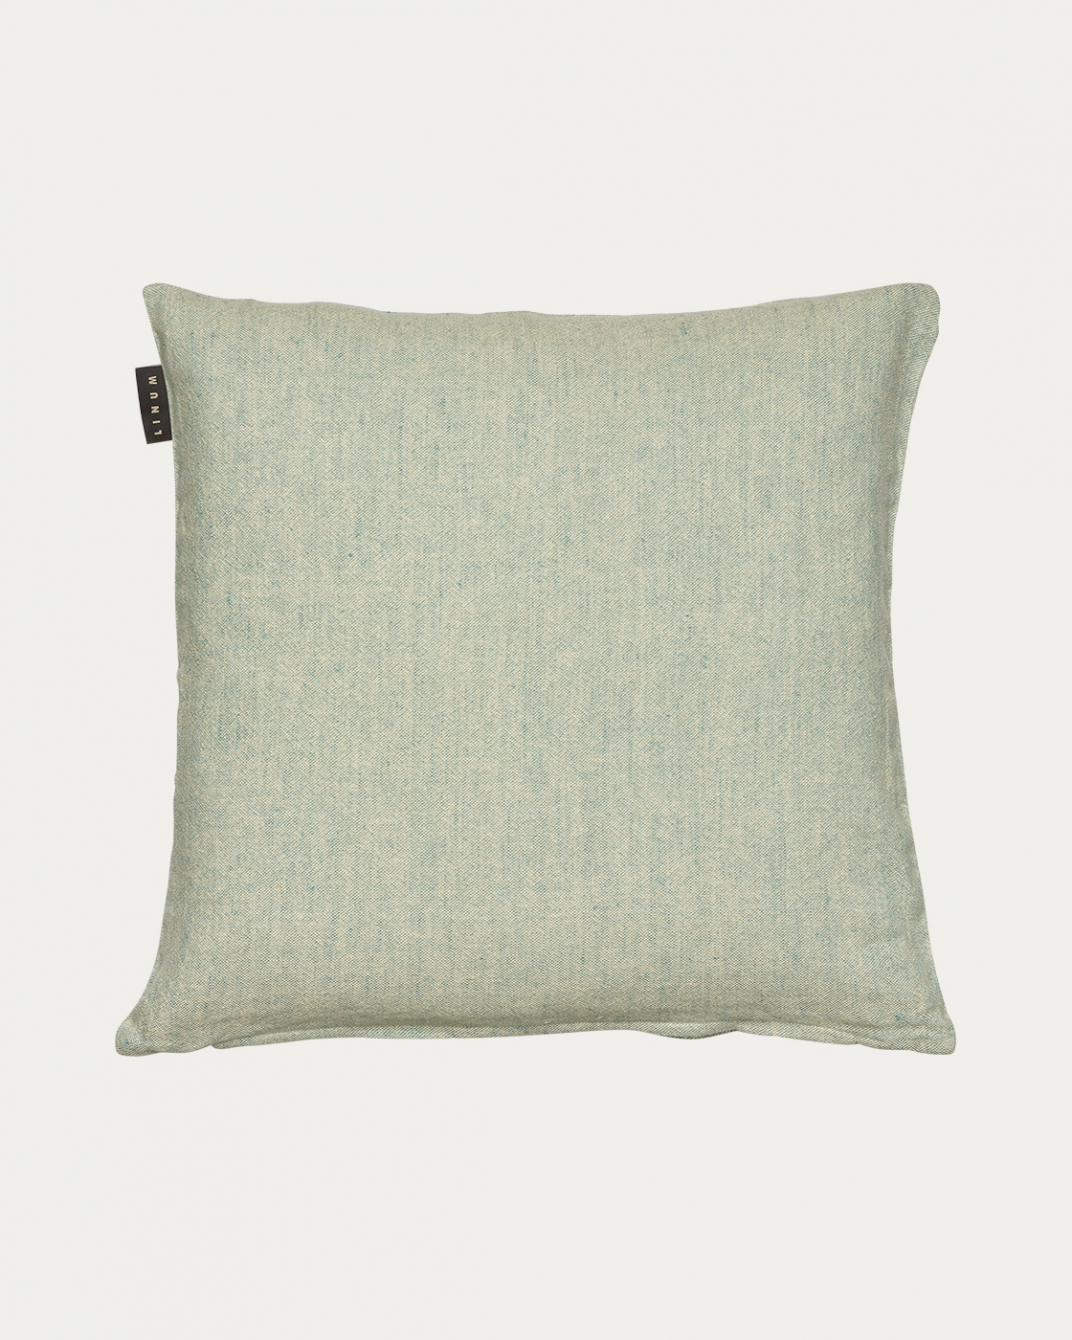 HEDVIG Cushion cover 50x50 cm Bright grey turquoise